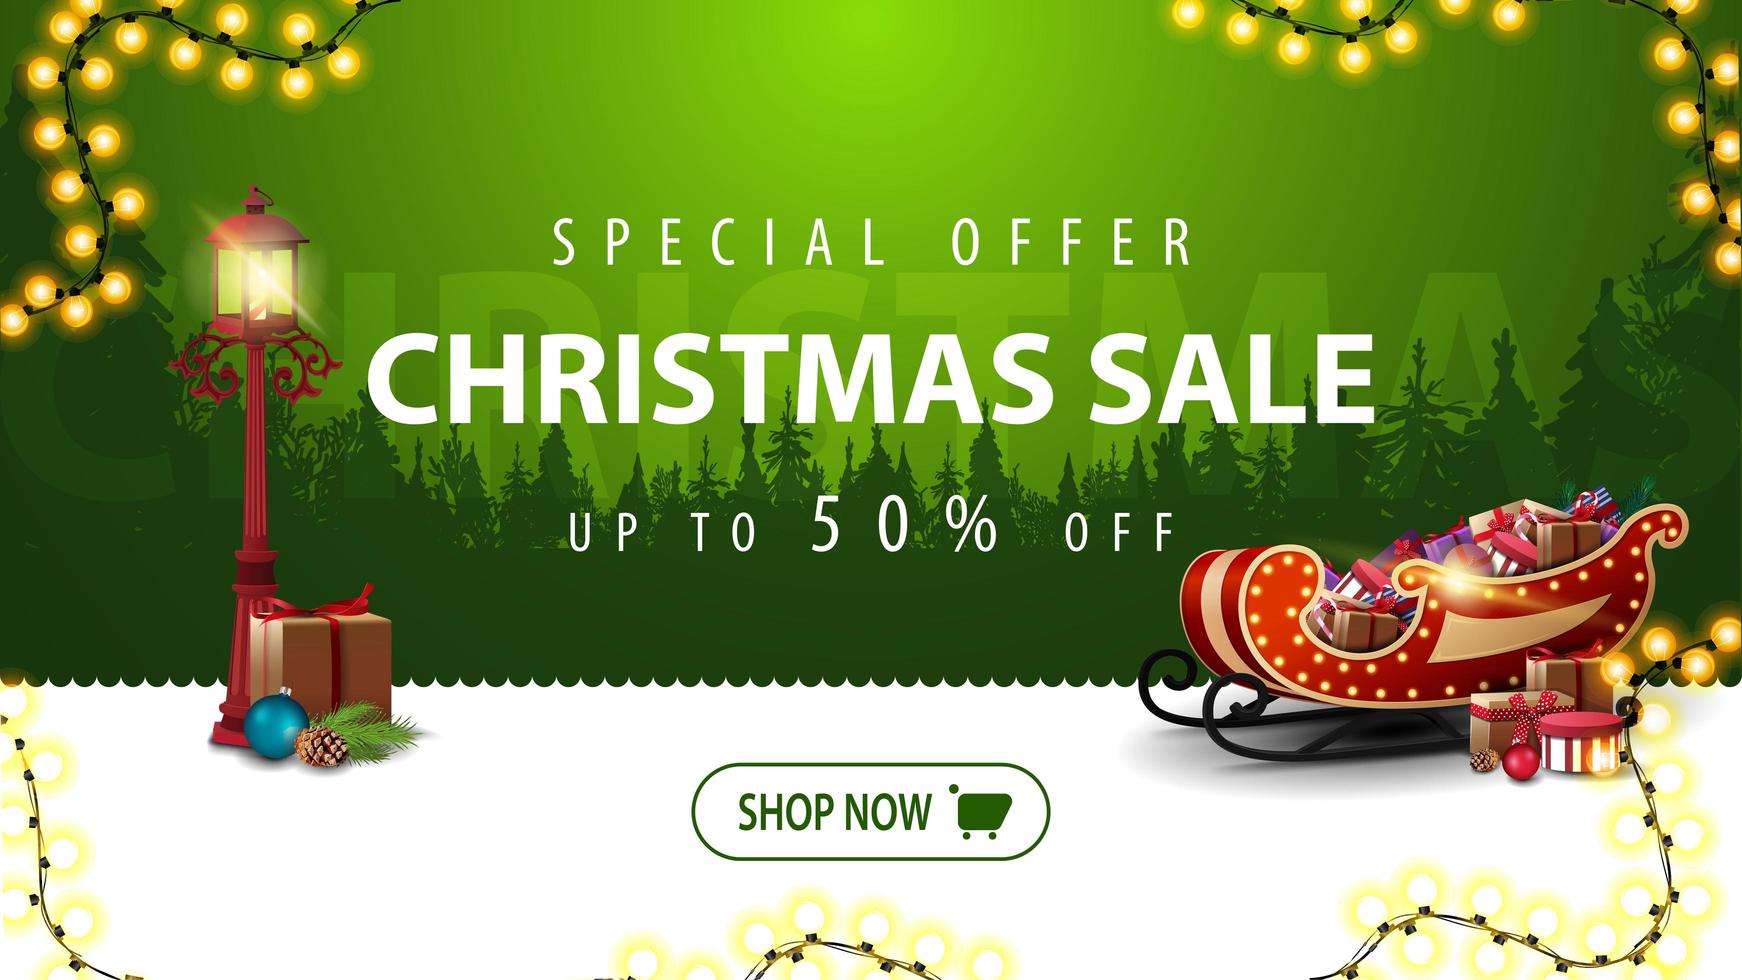 Special offer, Christmas sale, up to 50 off, green modern banner for website with garland, button, vintage pole lantern and Santa Sleigh with presents vector